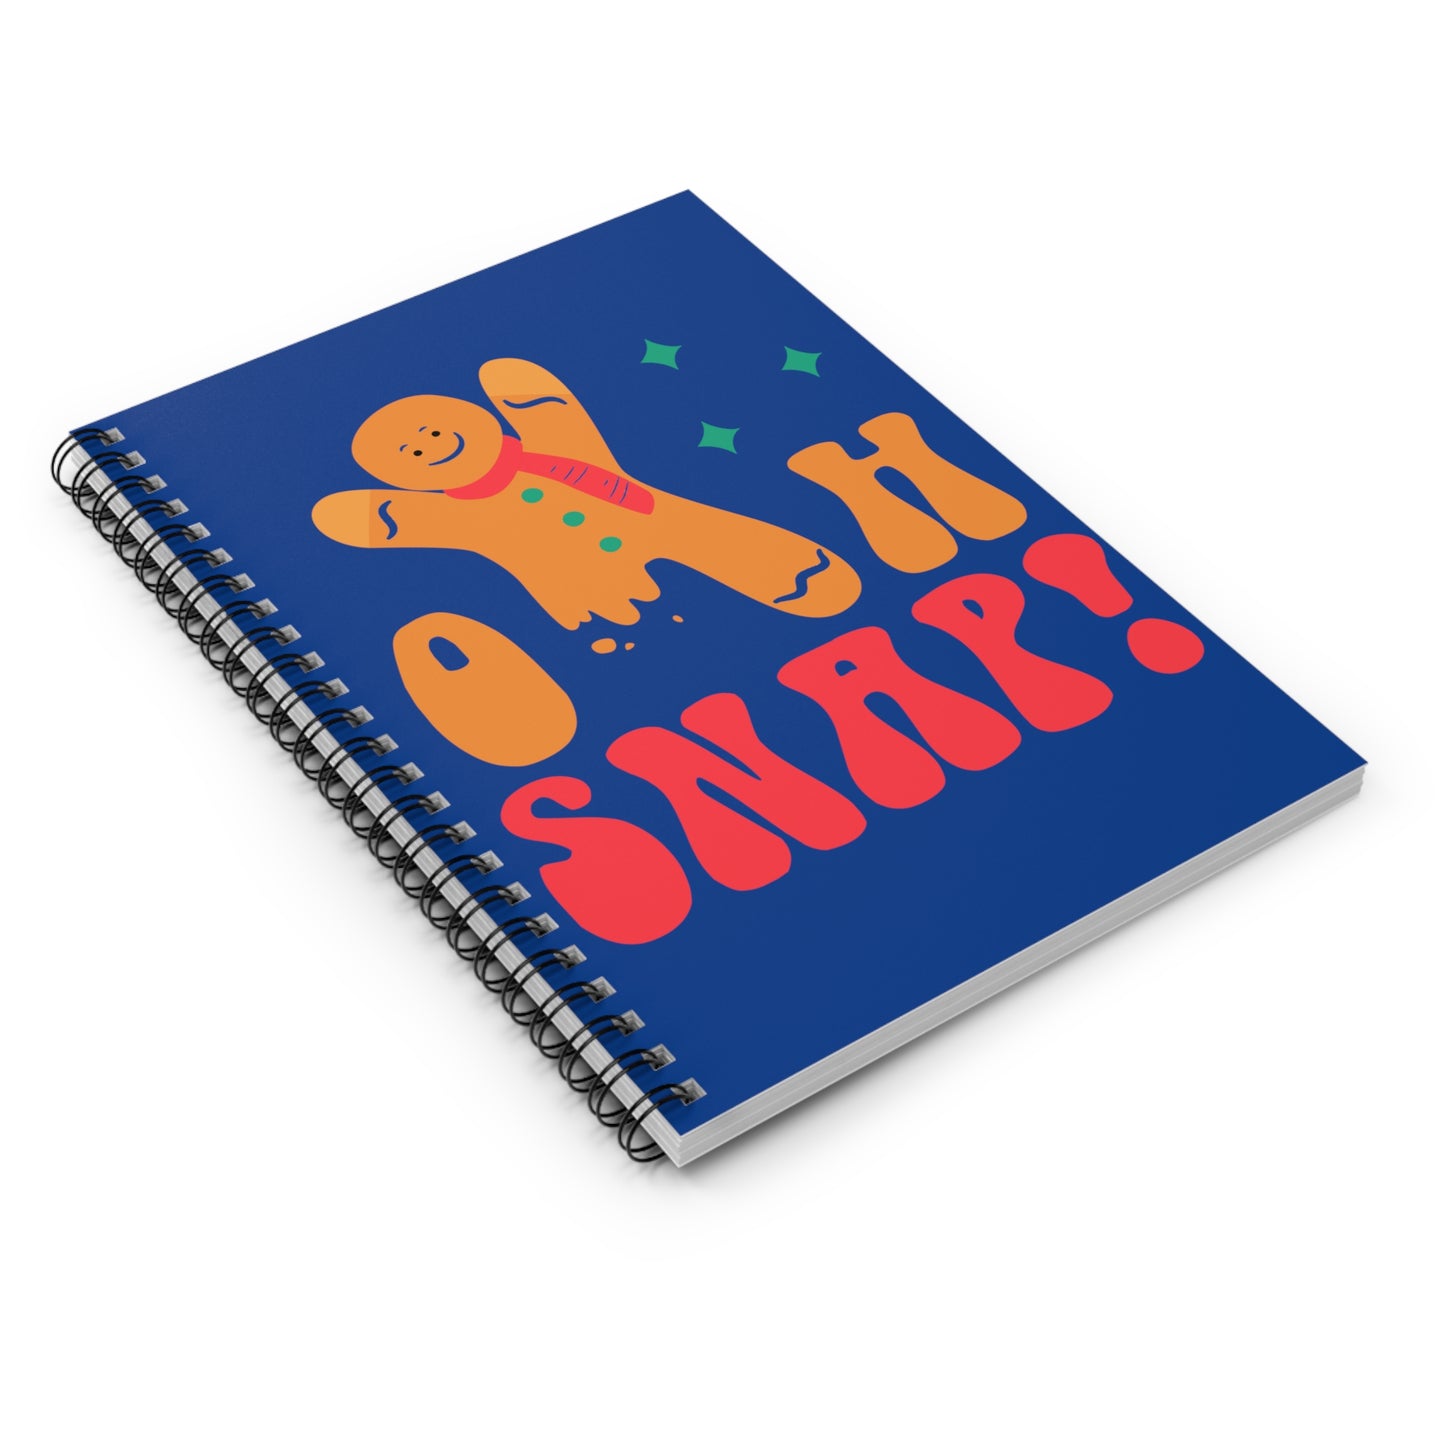 Oh SNAP Christmas Gingerbread Man: Spiral Notebook - Log Books - Journals - Diaries - and More Custom Printed by TheGlassyLass